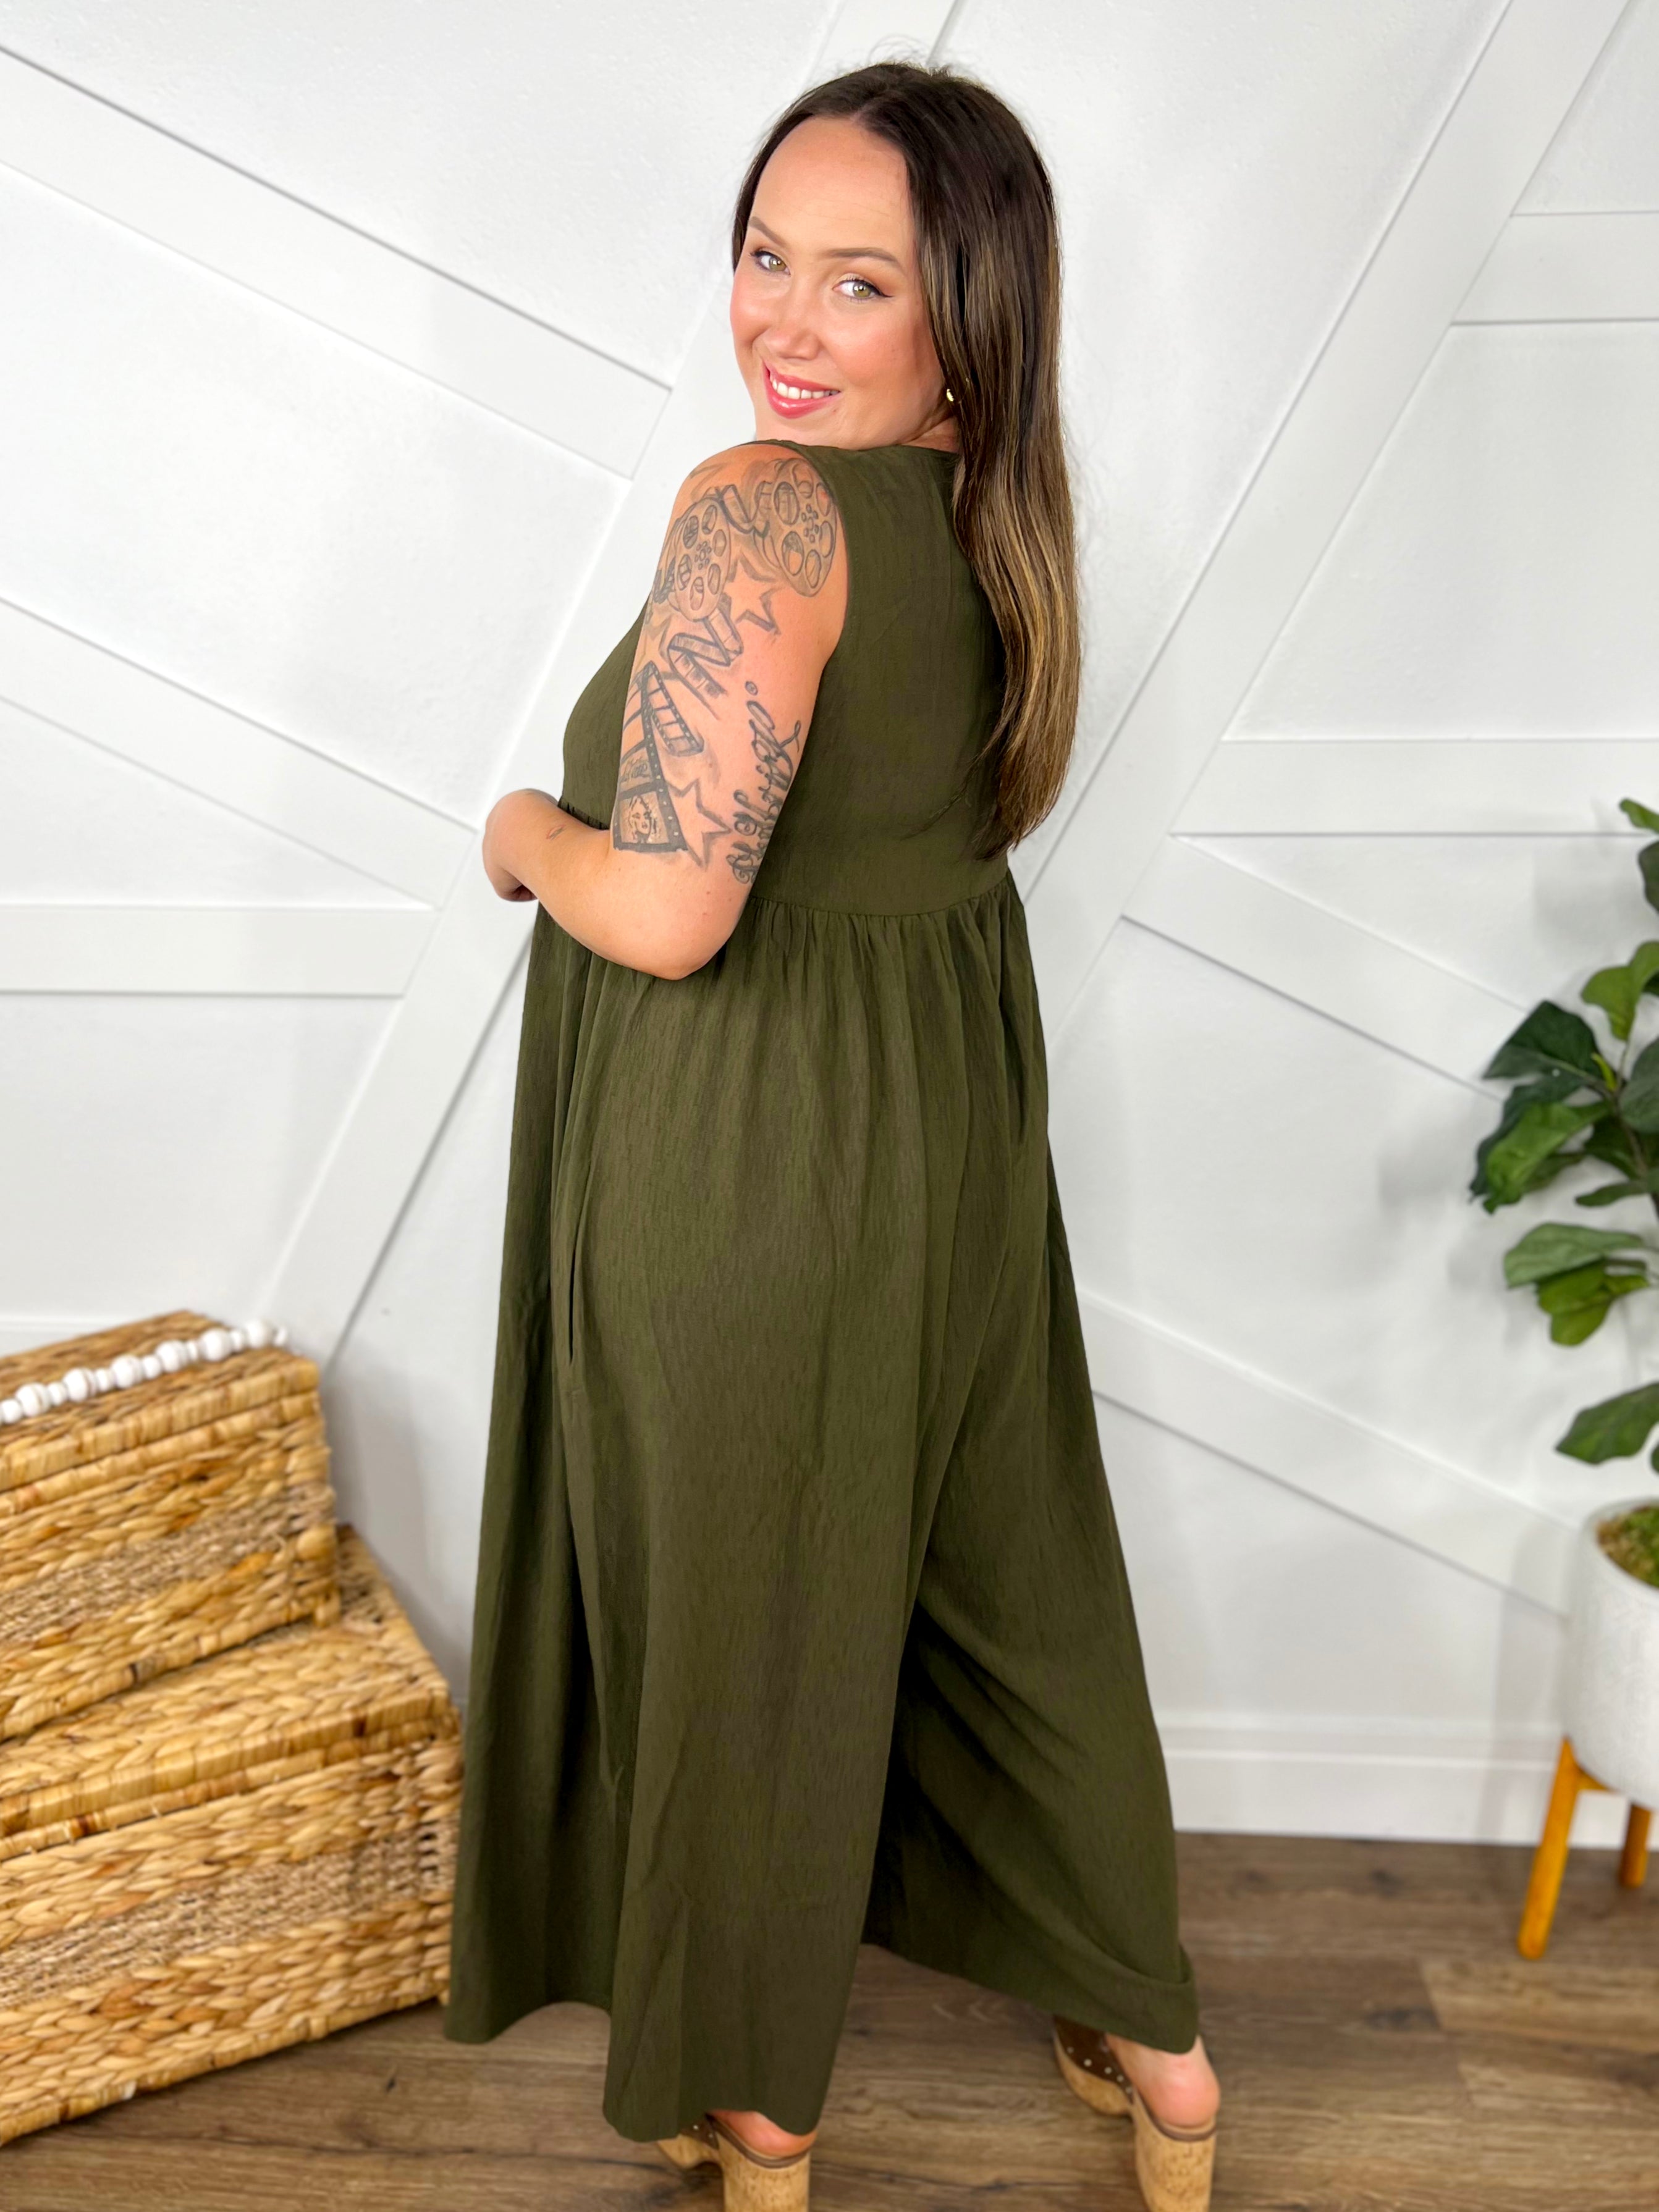 RESTOCK : The Good Flow Romper-230 Dresses/Jumpsuits/Rompers-Oddi-Heathered Boho Boutique, Women's Fashion and Accessories in Palmetto, FL